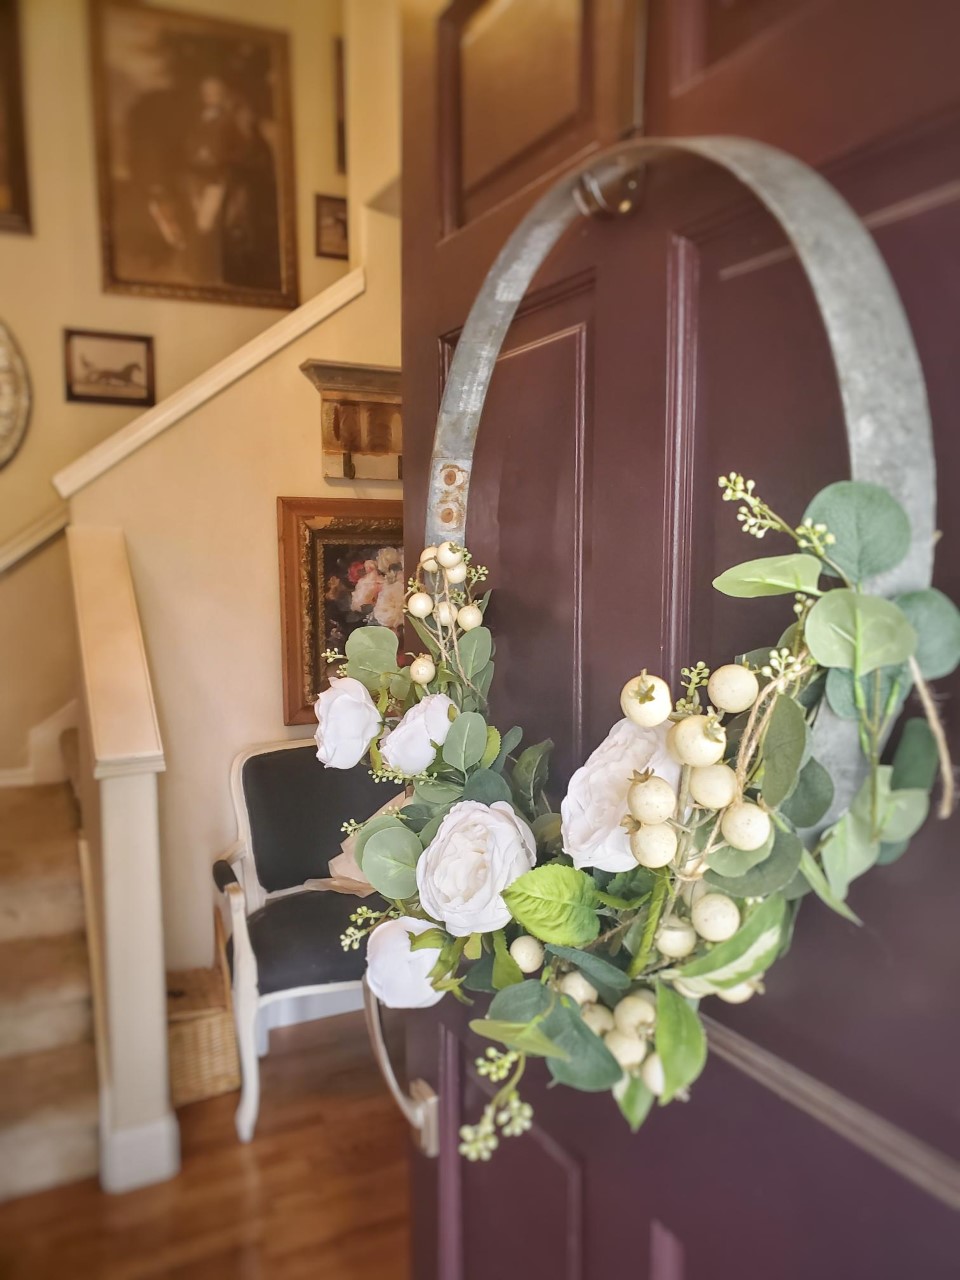 How to Make a Spring Barrel Ring Wreath